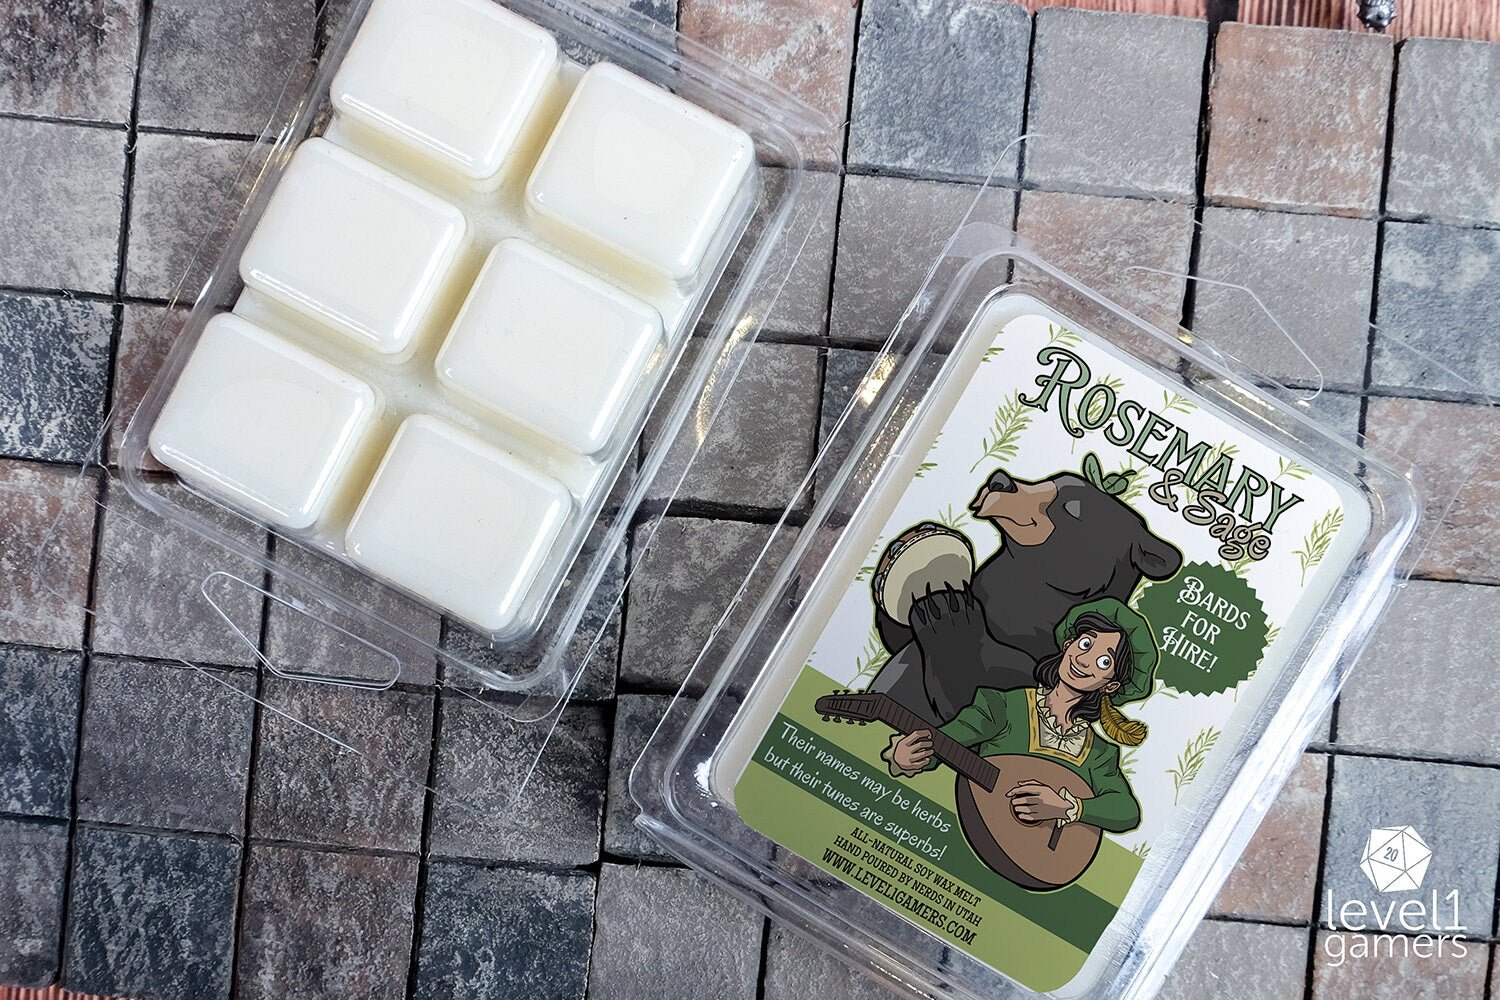 Rosemary & Sage Wax Melts  Level 1 Gamers   